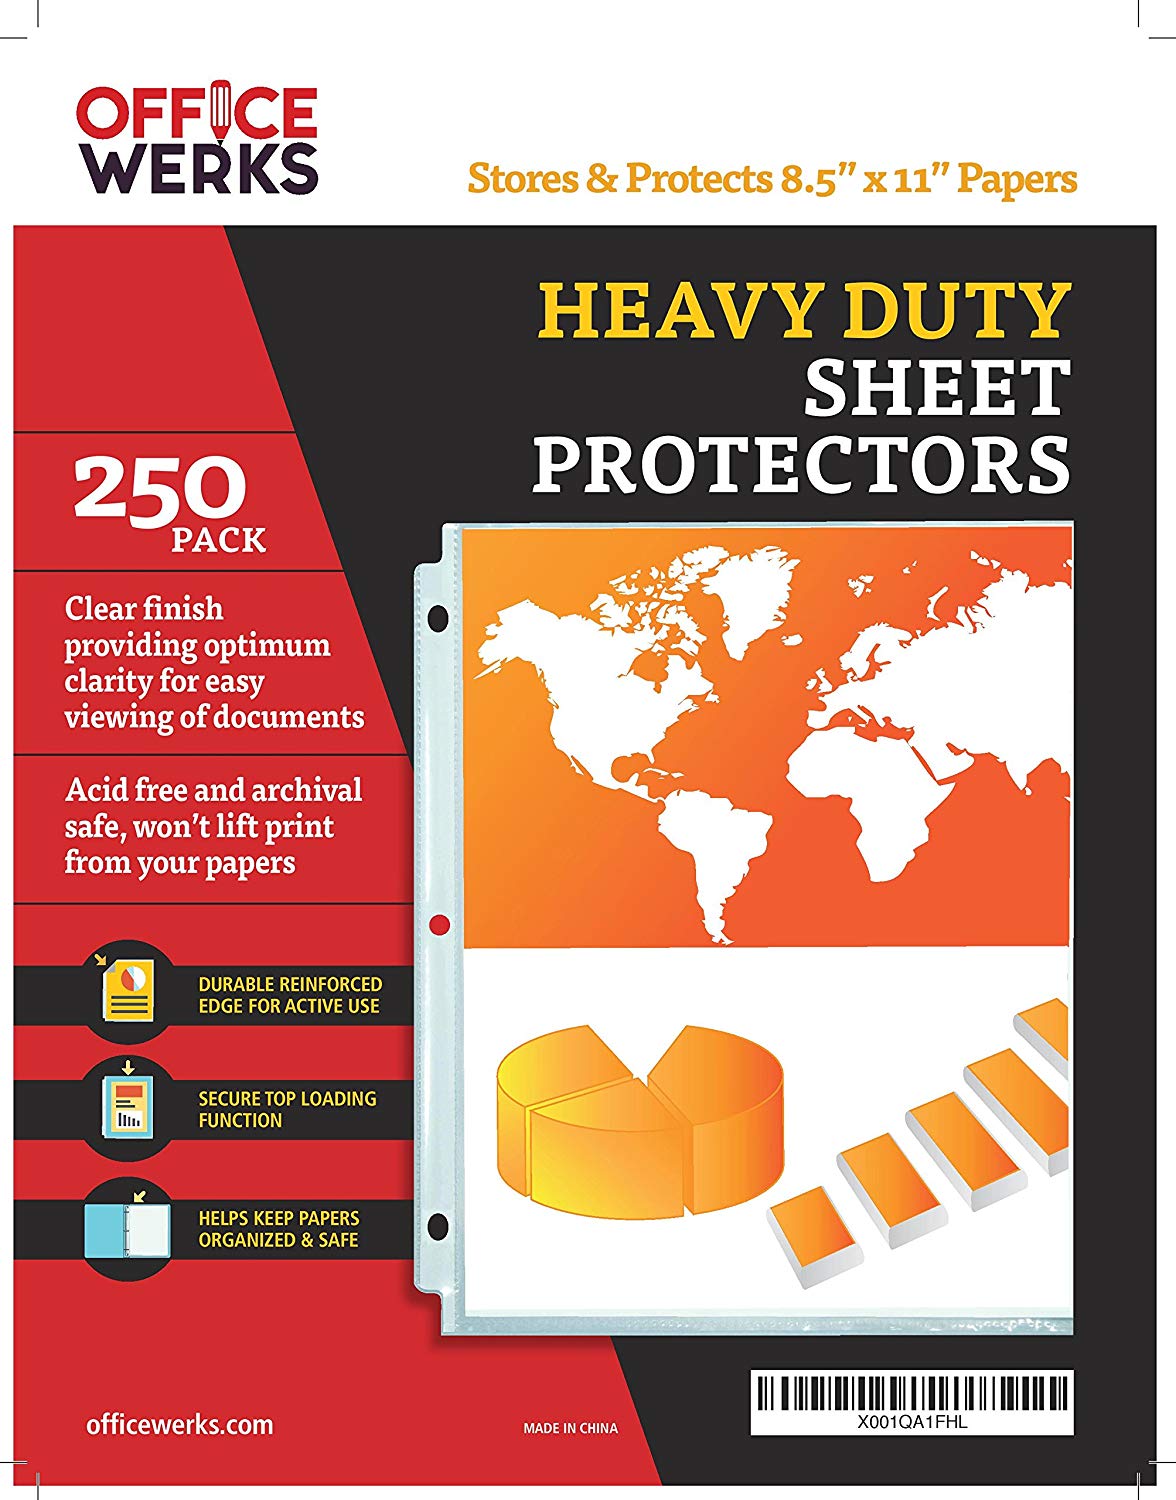 11x17 Sheet Protector - Holds 11x17 Sheets - Pack of 25 